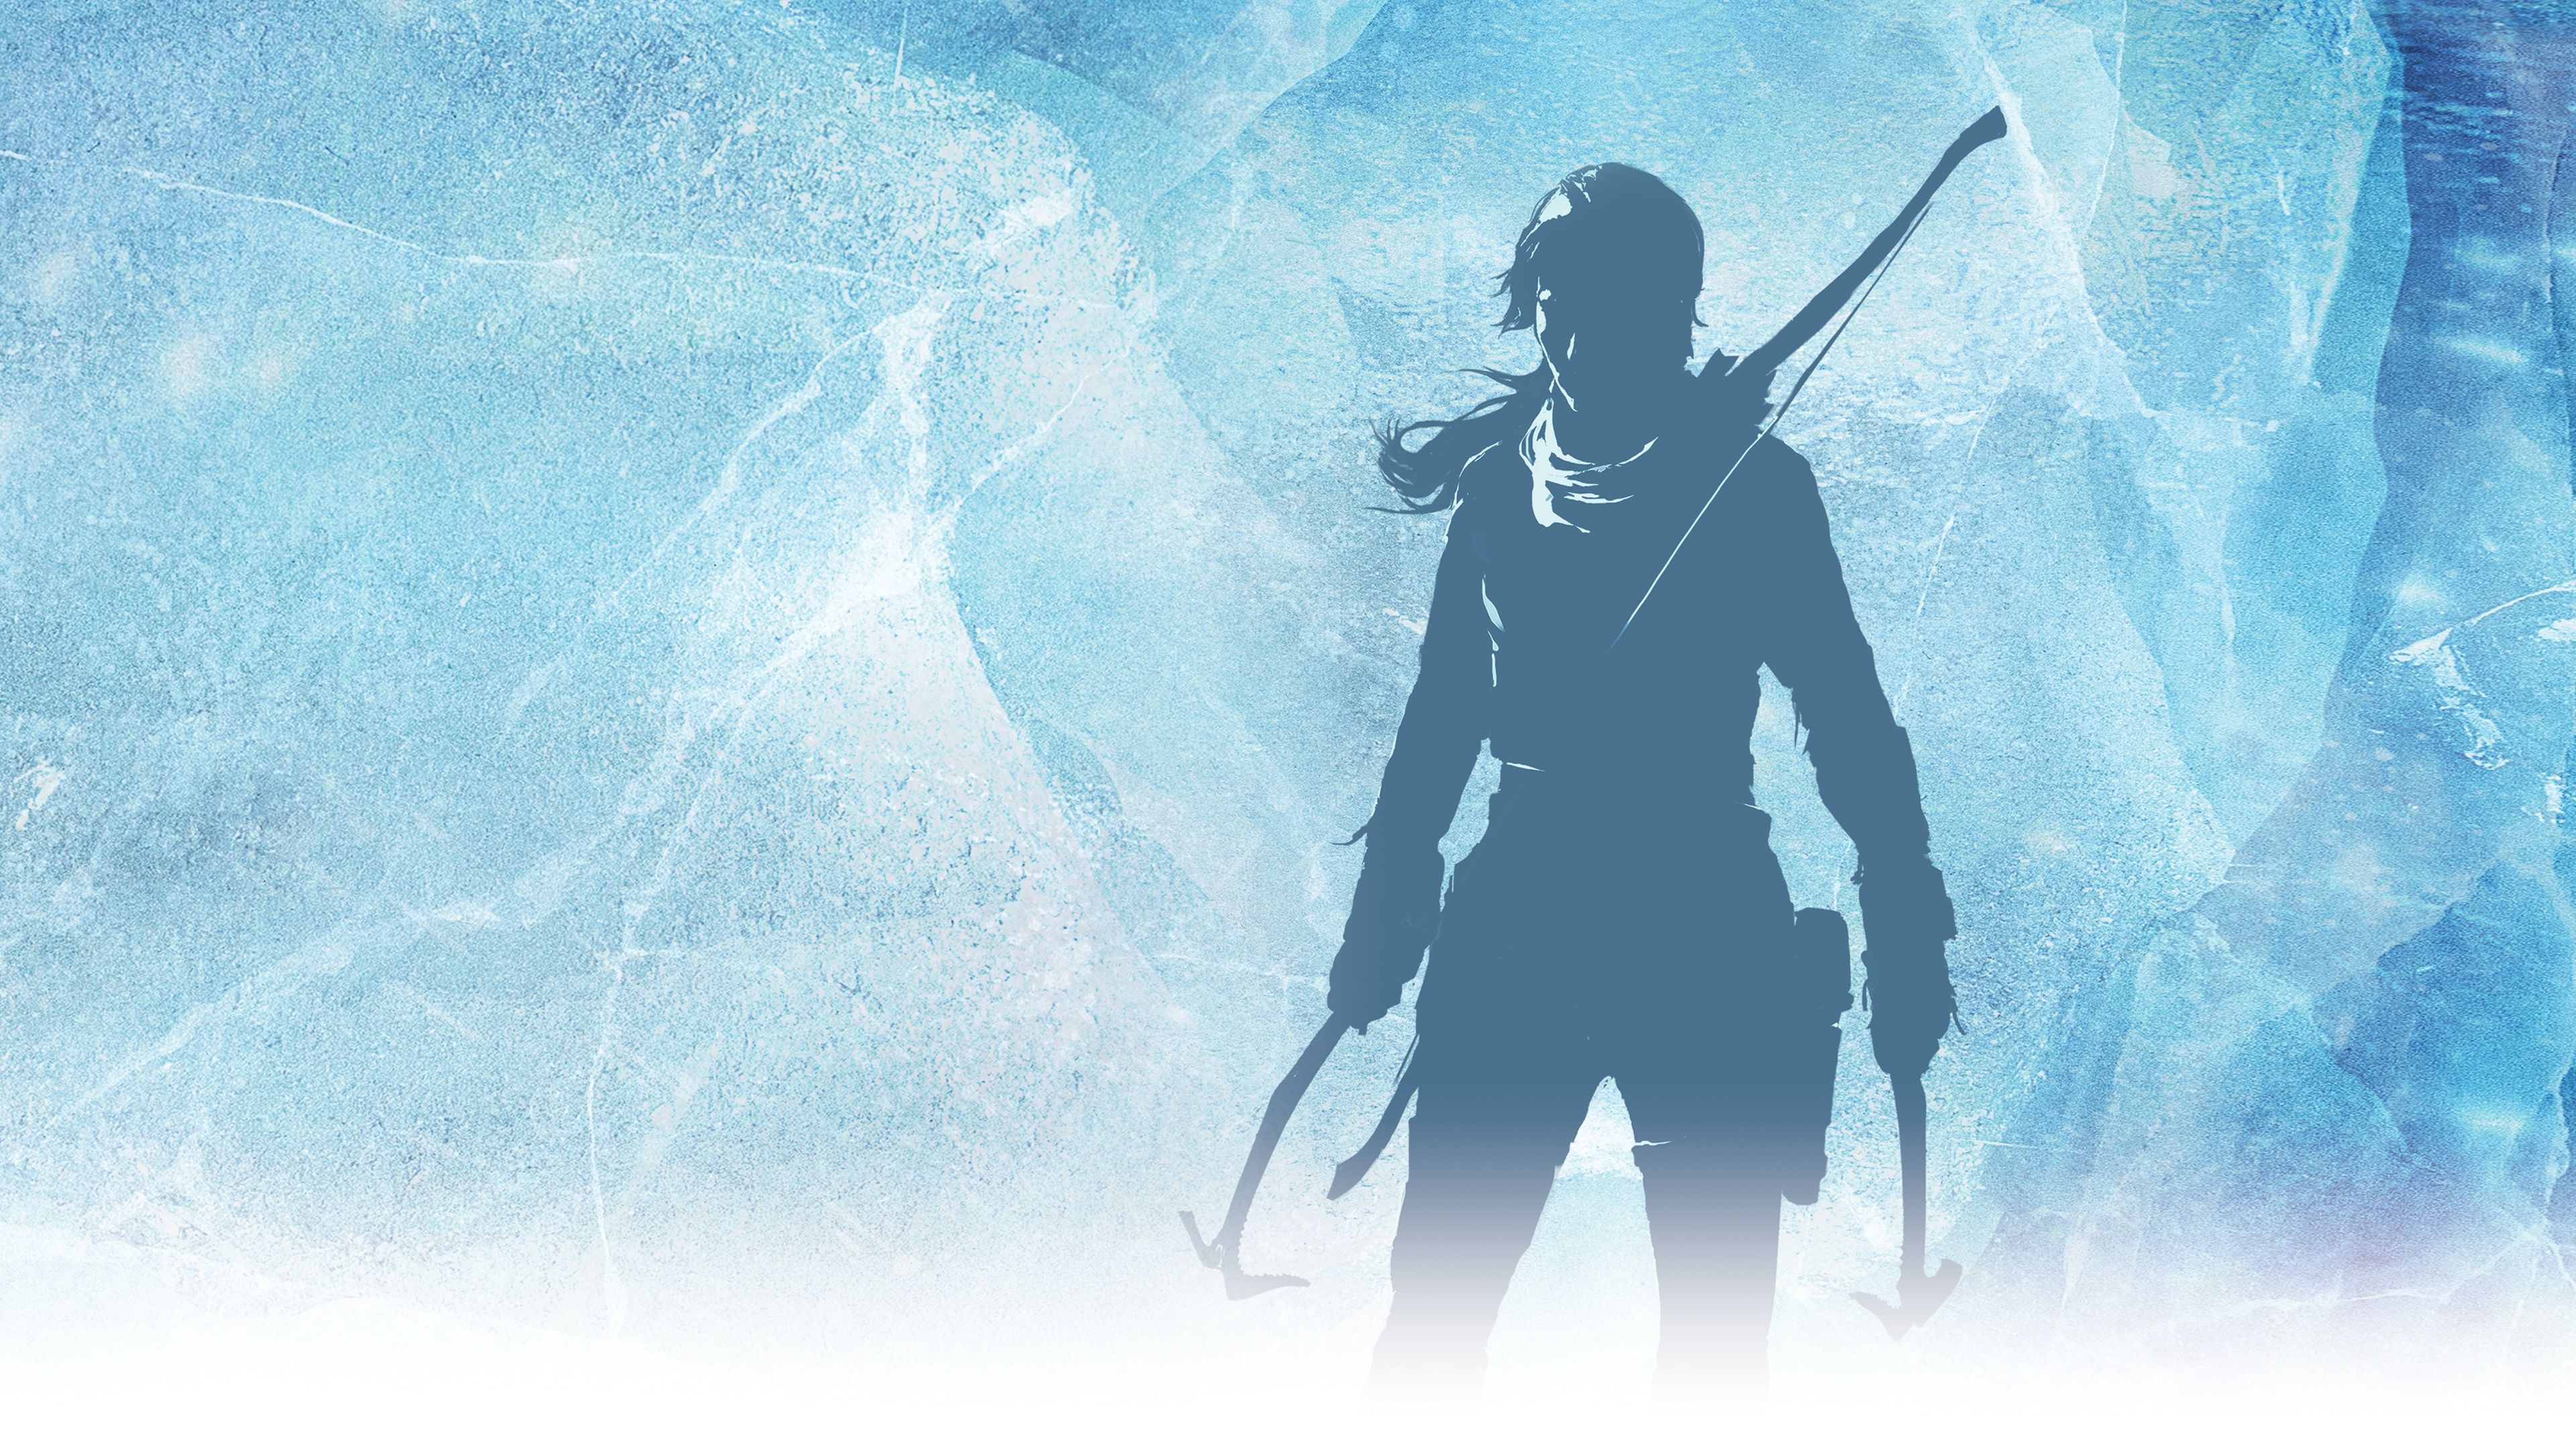 Rise of the Tomb Raider cover image